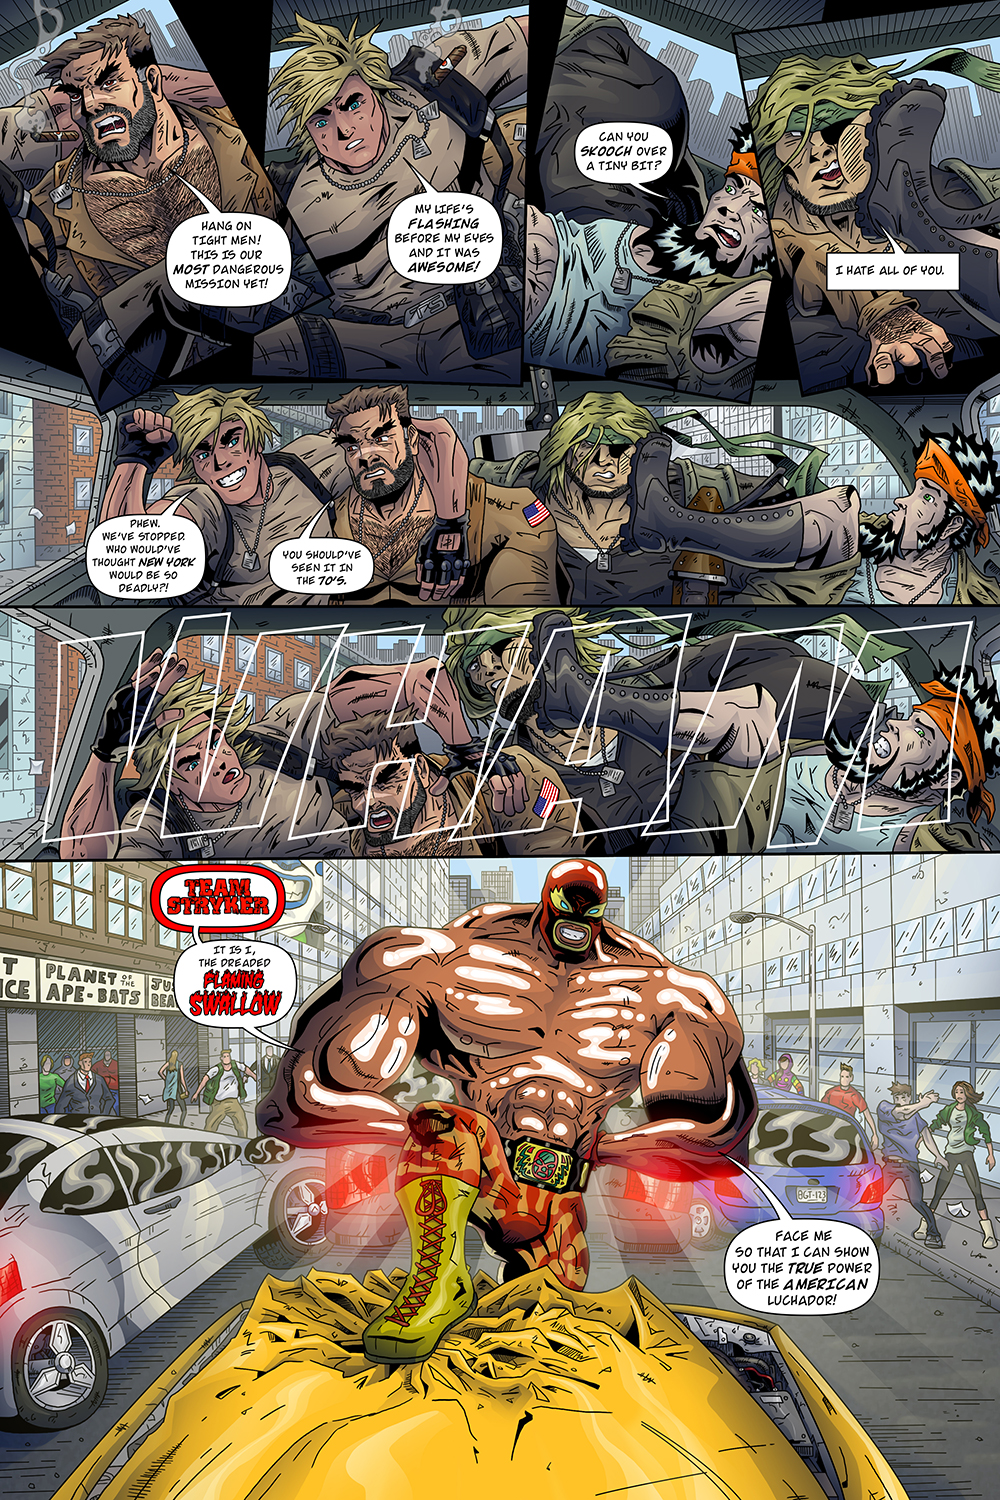 MISSION 010: PAGE 02 “AMERICAN LUCHADOR”